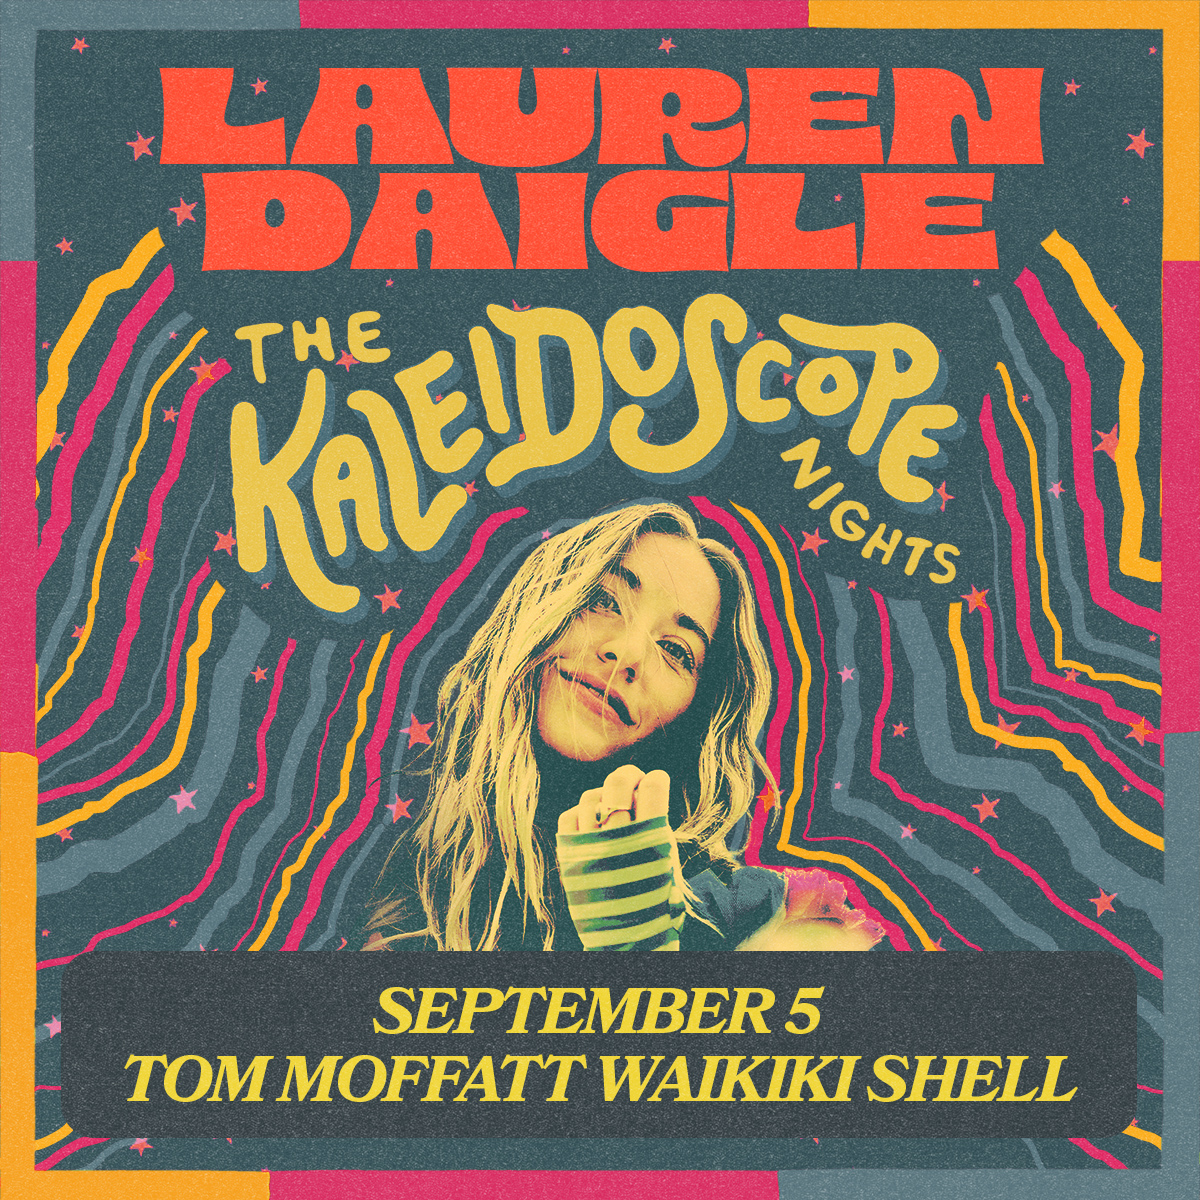 Lauren Daigle and The Kaleidoscope Nights tour on sale now! Tom Moffatt Waikiki Shell on September 5! Get your tickets here: ticketmaster.com/event/0A00605C…